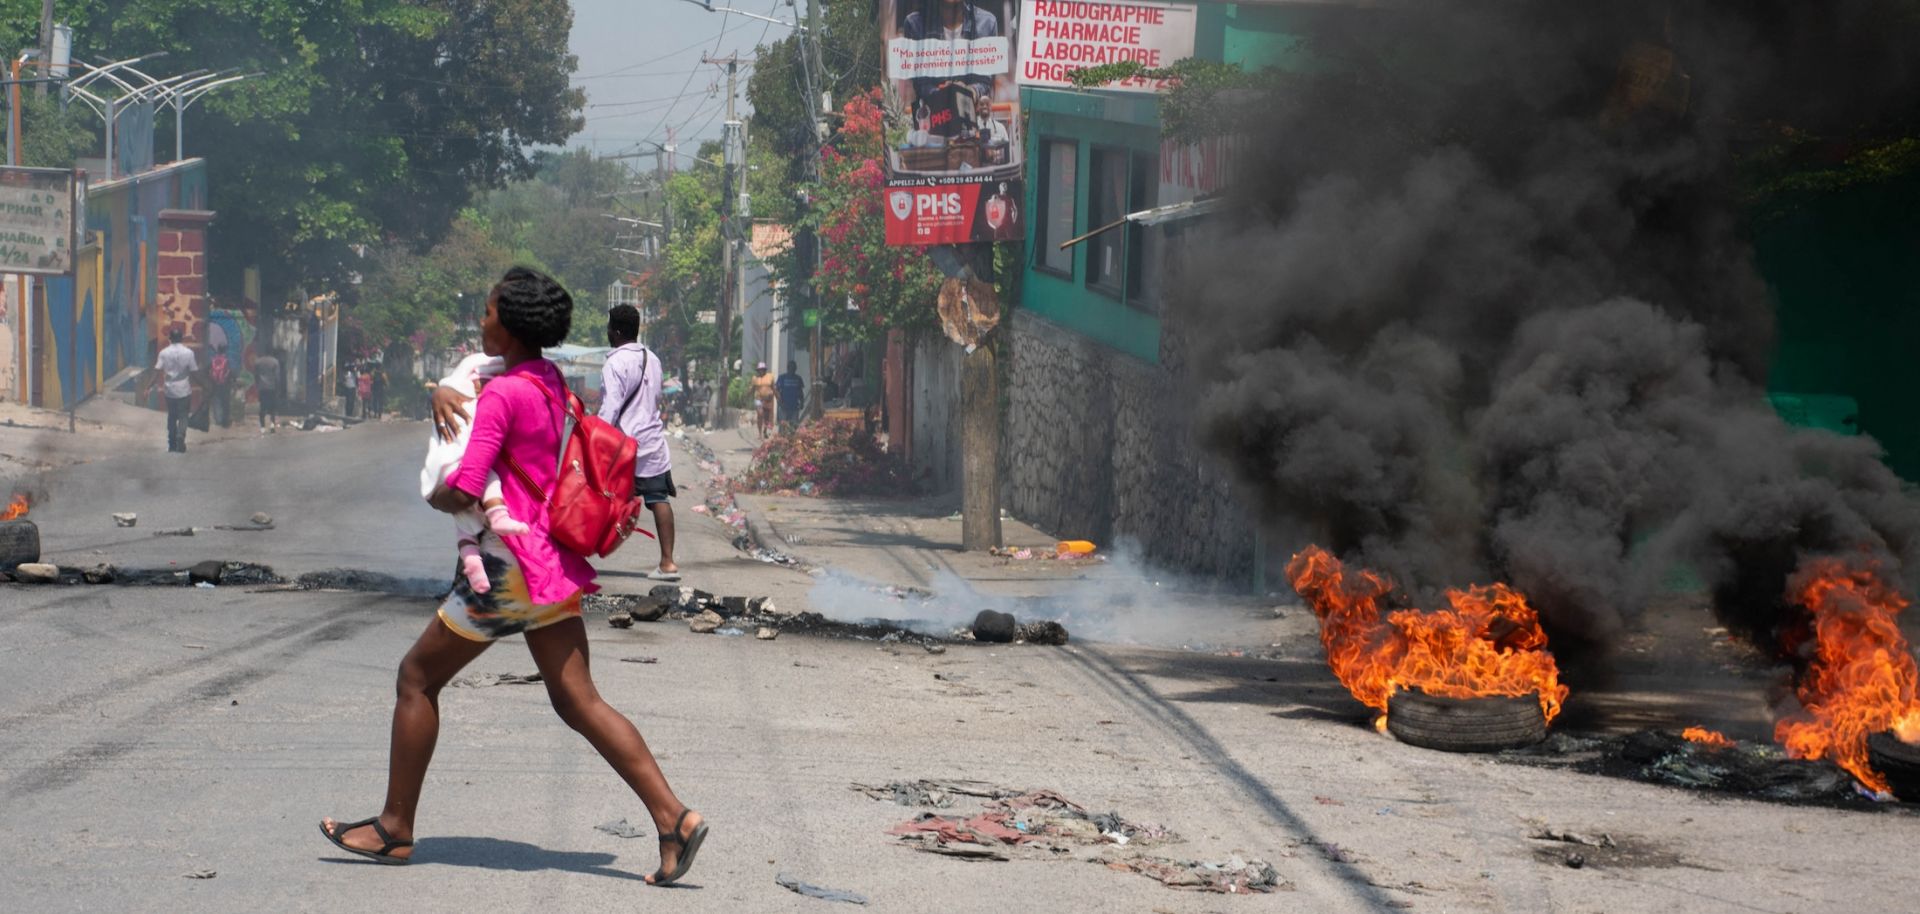 A woman carrying a child runs from an area in Port-au-Prince, Haiti, after hearing gunshots on March 20, 2024.